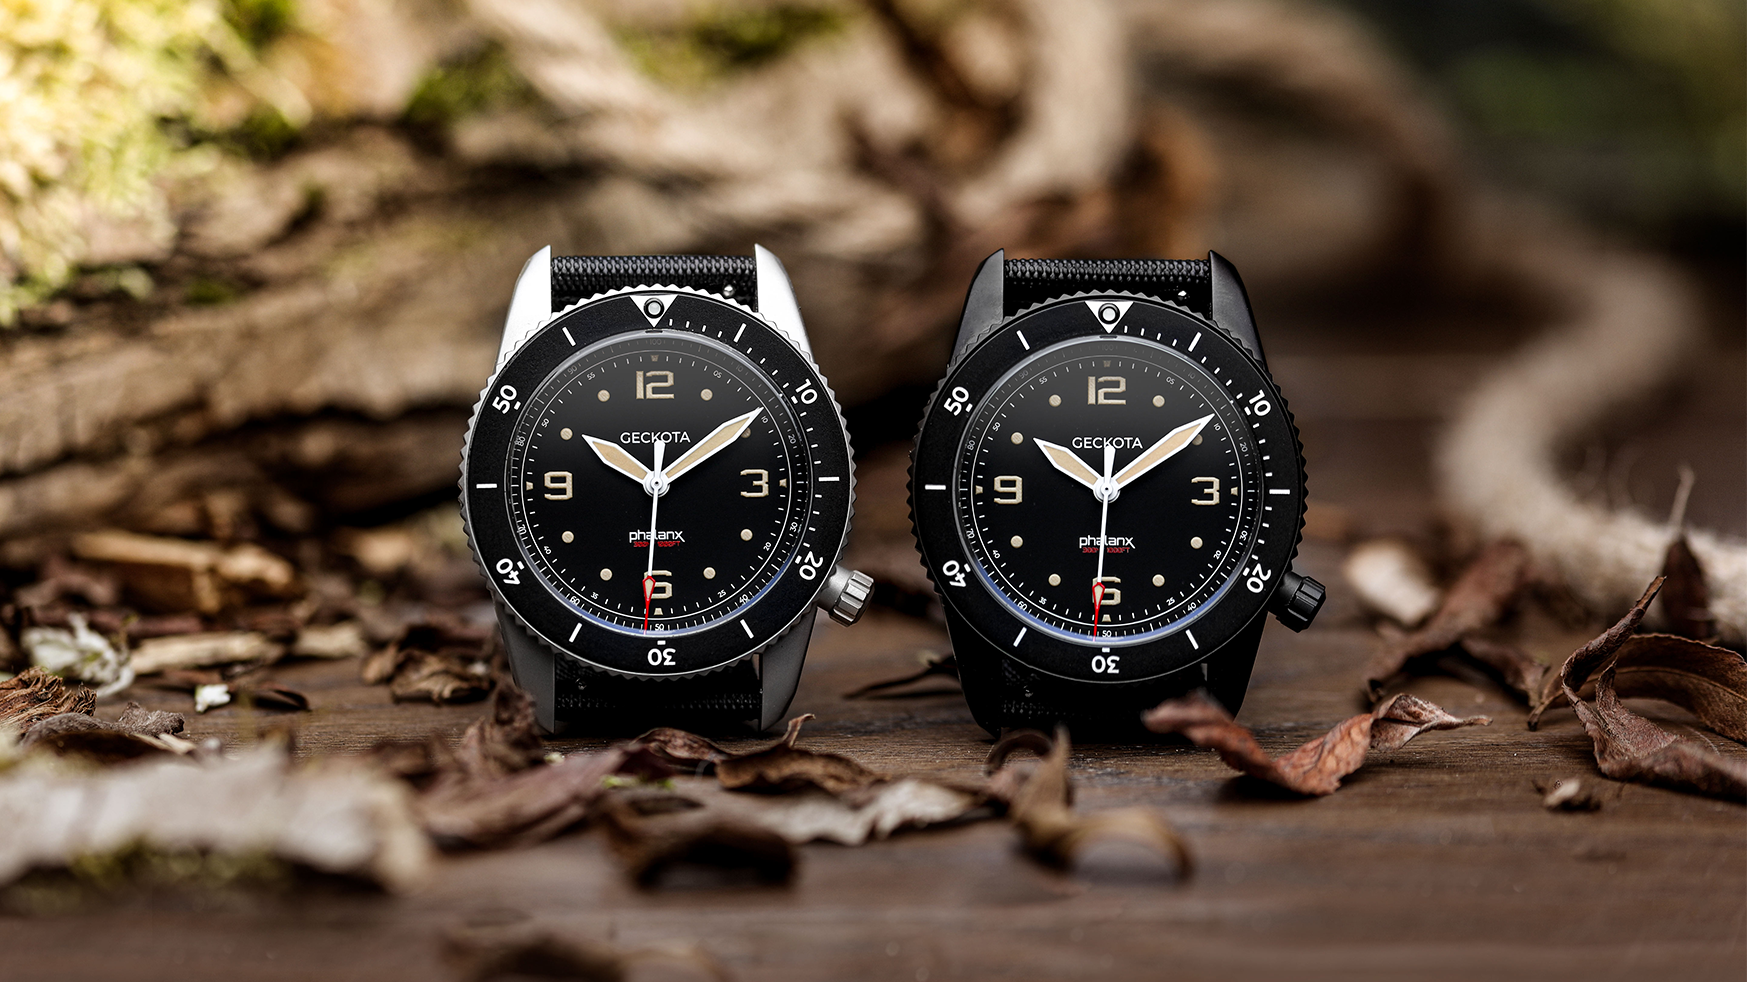 GECKOTA S-01 PHALANX SPECIAL OPERATIONS WATCH / BLACKOUT EDITION